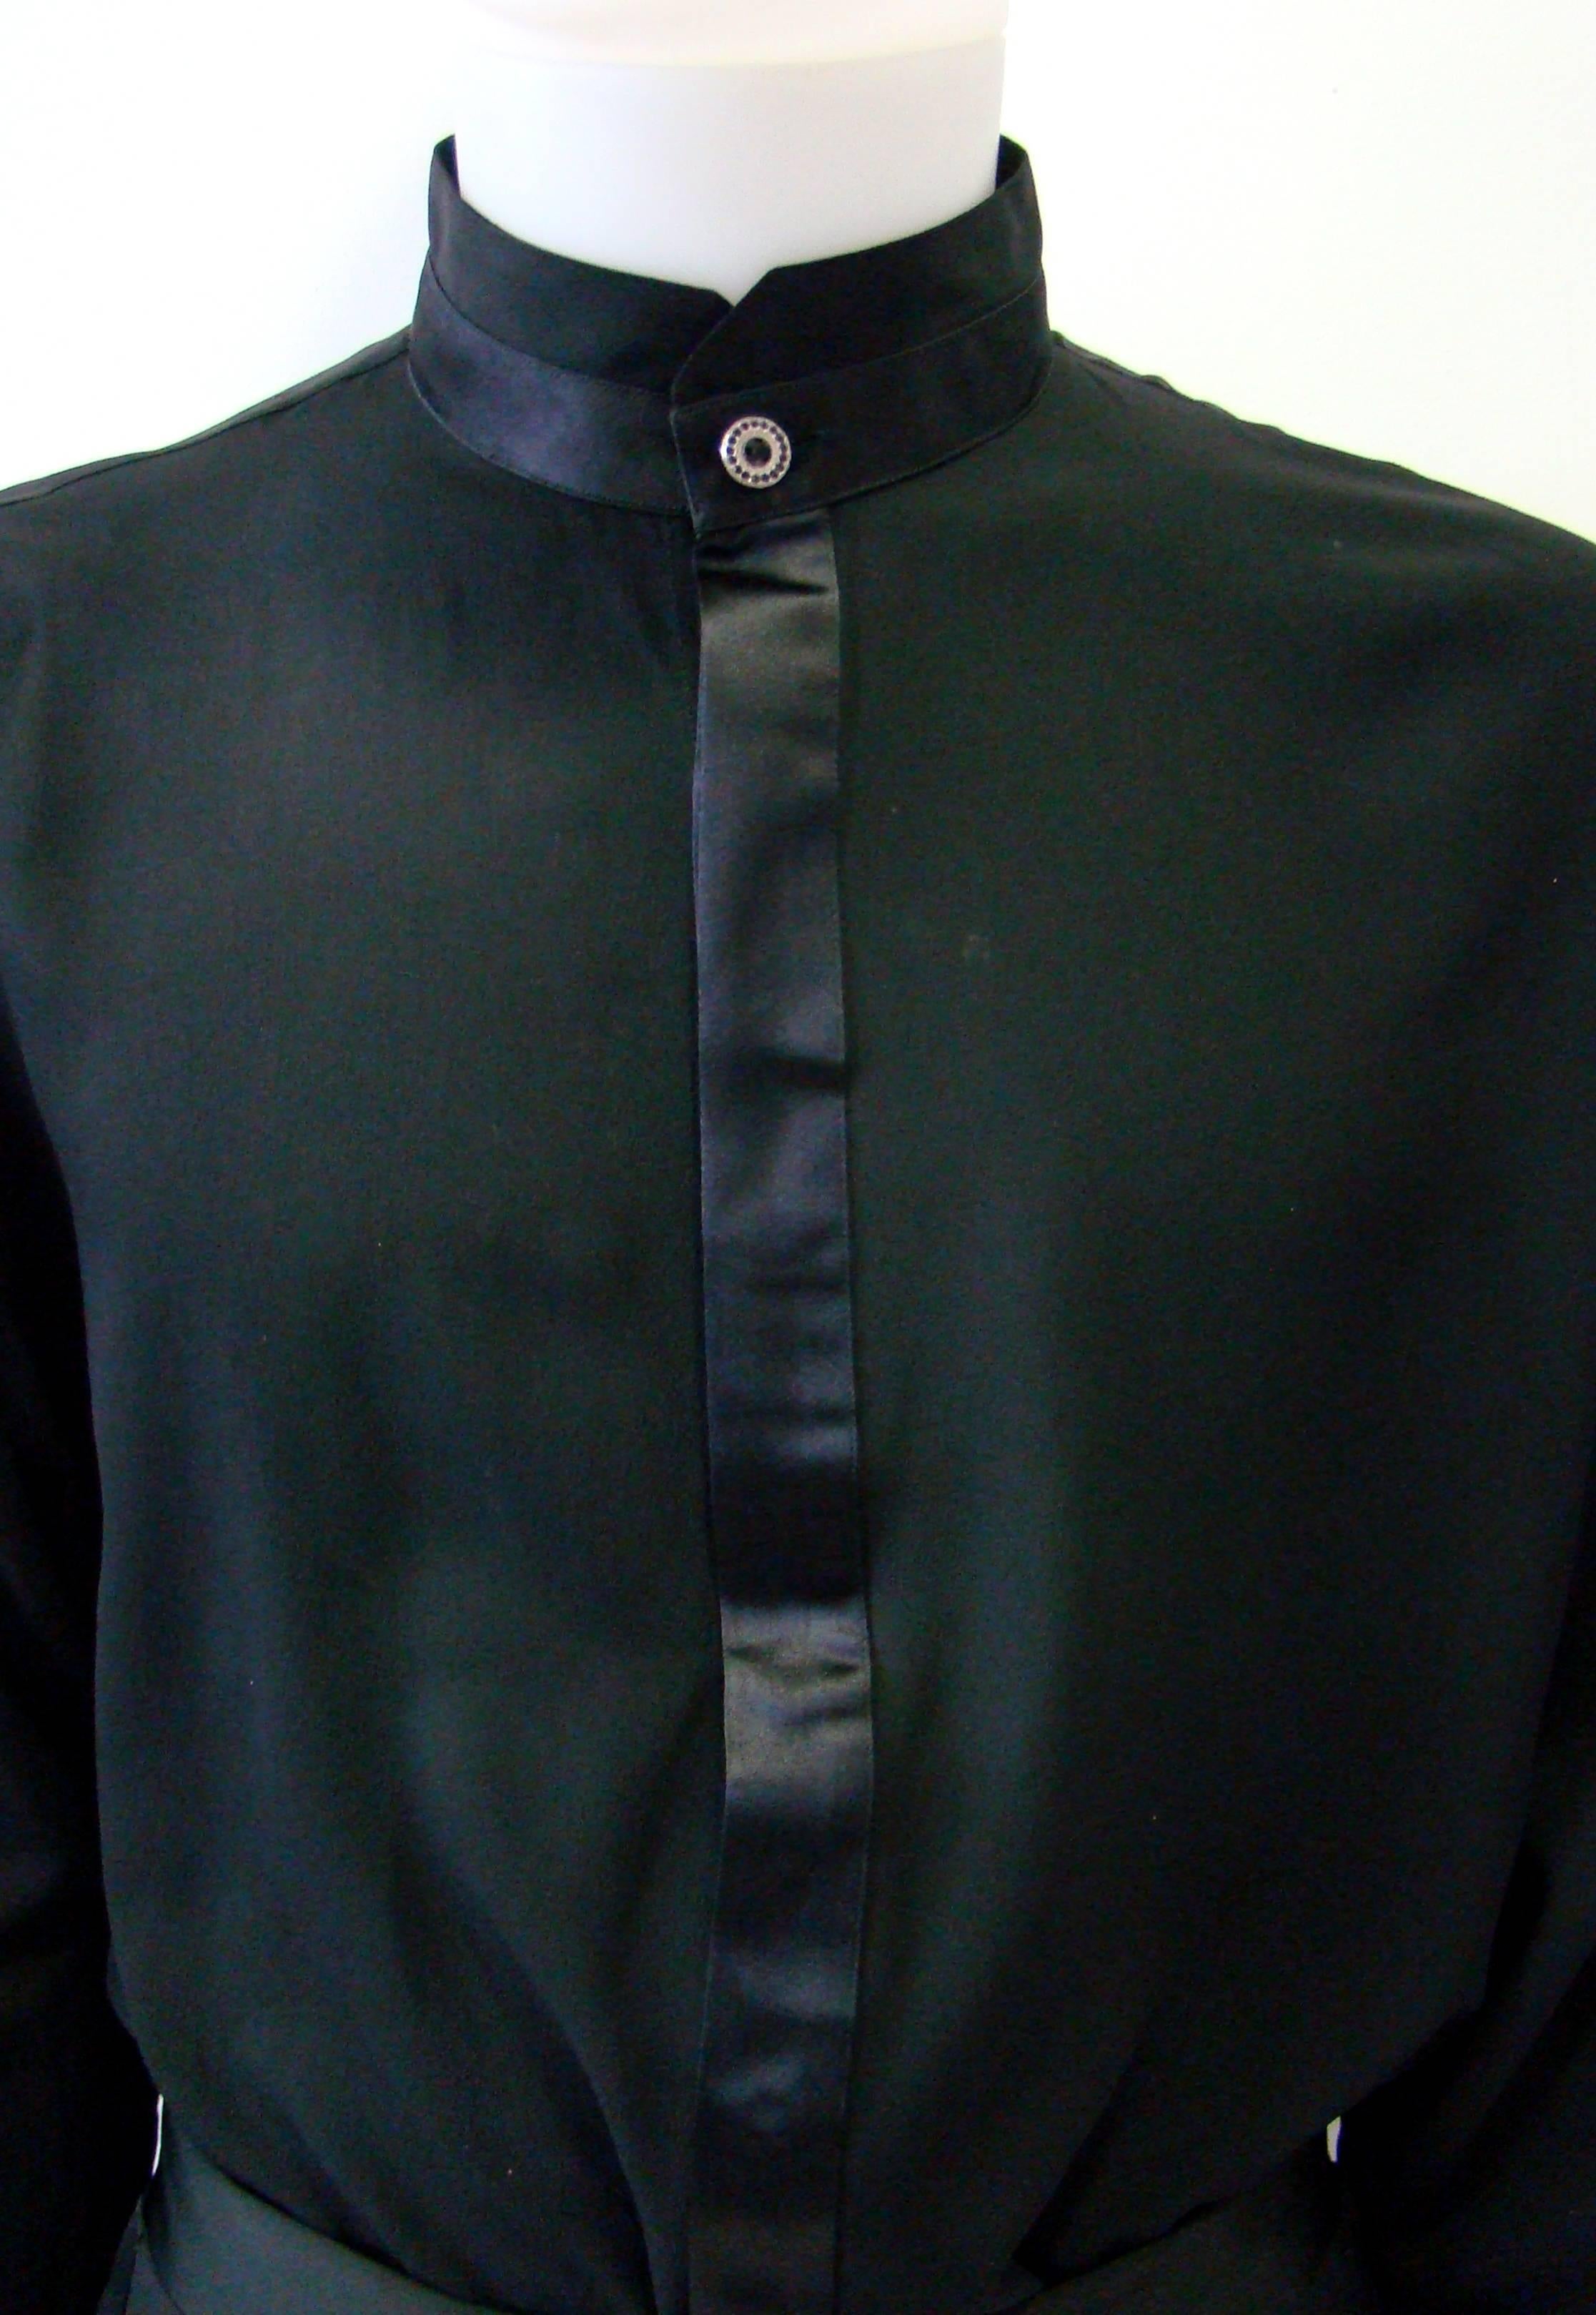 Black Istante By Gianni Versace Tuxedo Evening Shirt For Sale